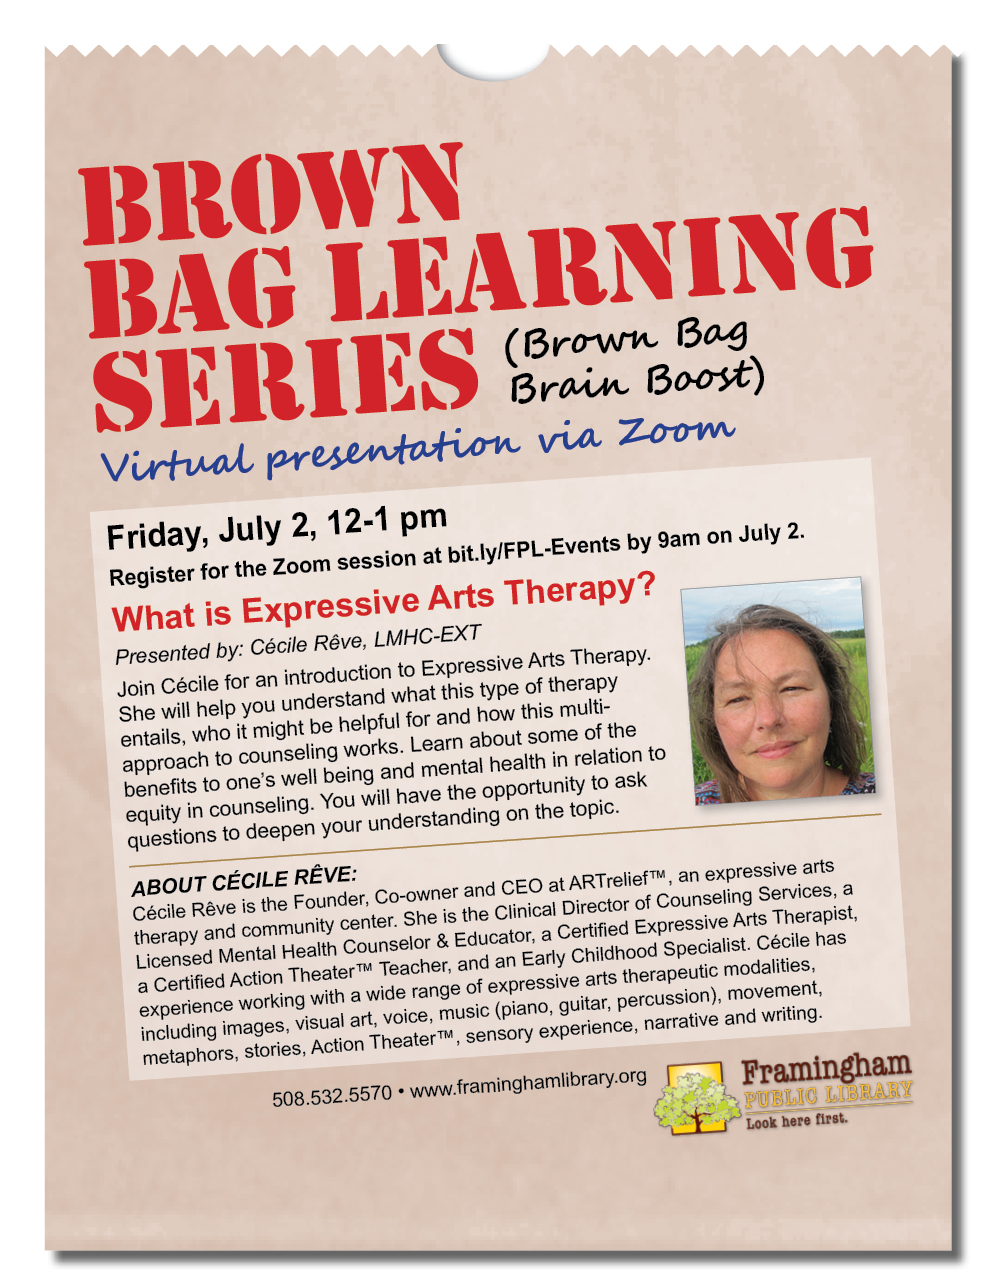 Brown Bag Learning Series: What is Expressive Arts Therapy? thumbnail Photo